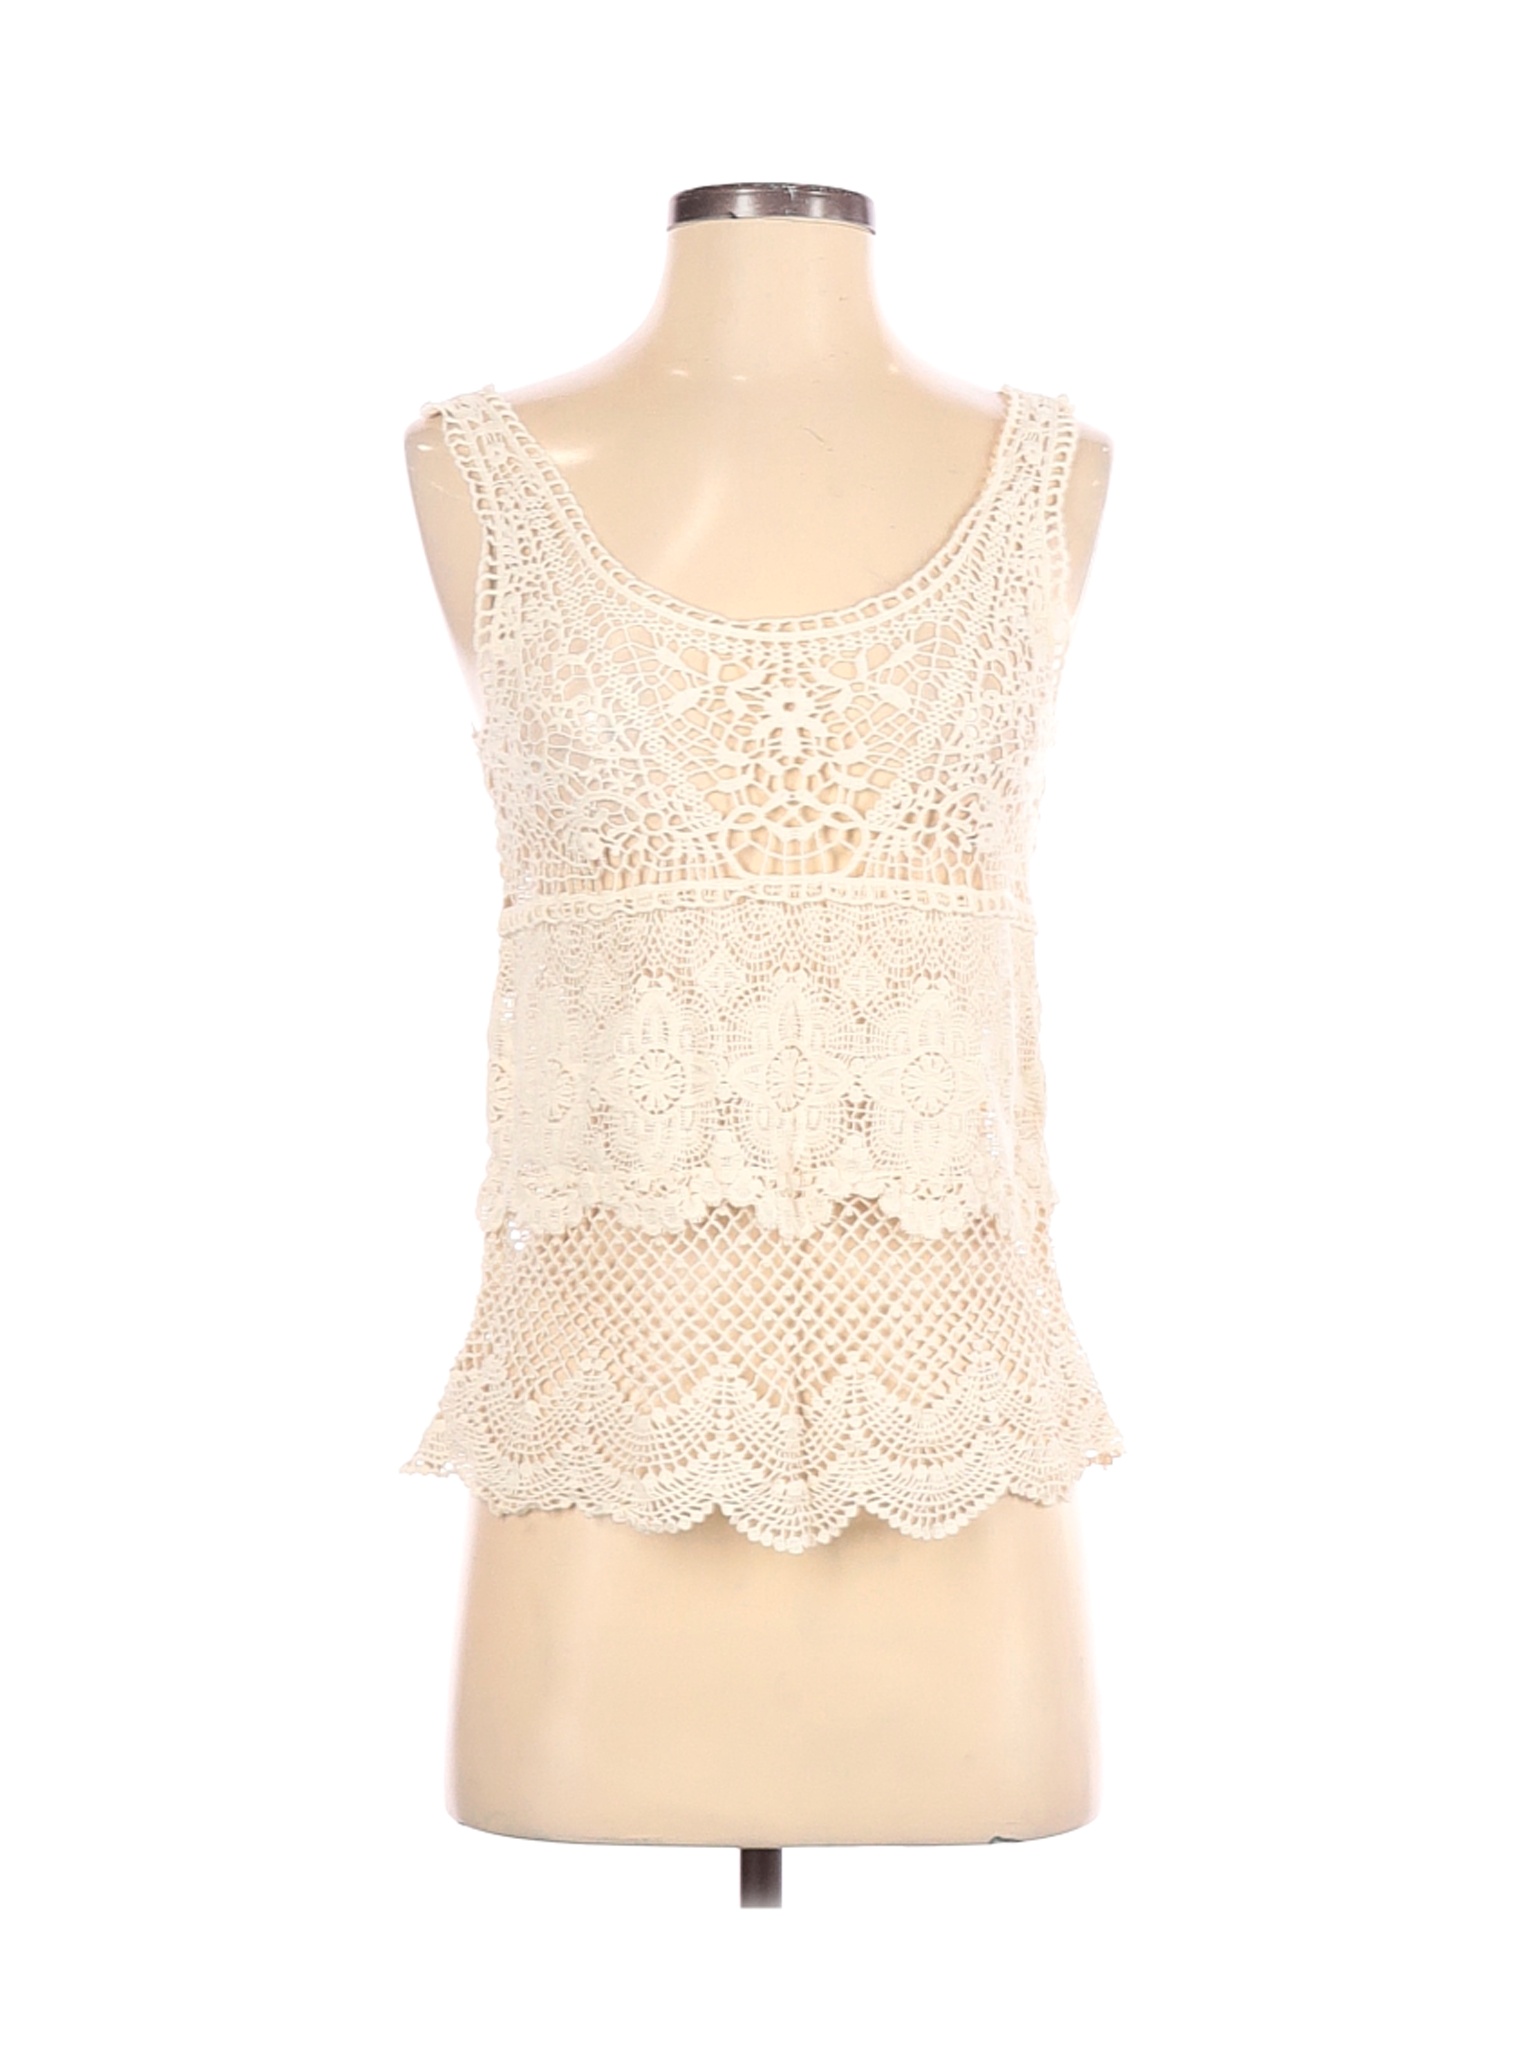 American Eagle Outfitters Women Ivory Sleeveless Blouse S | eBay